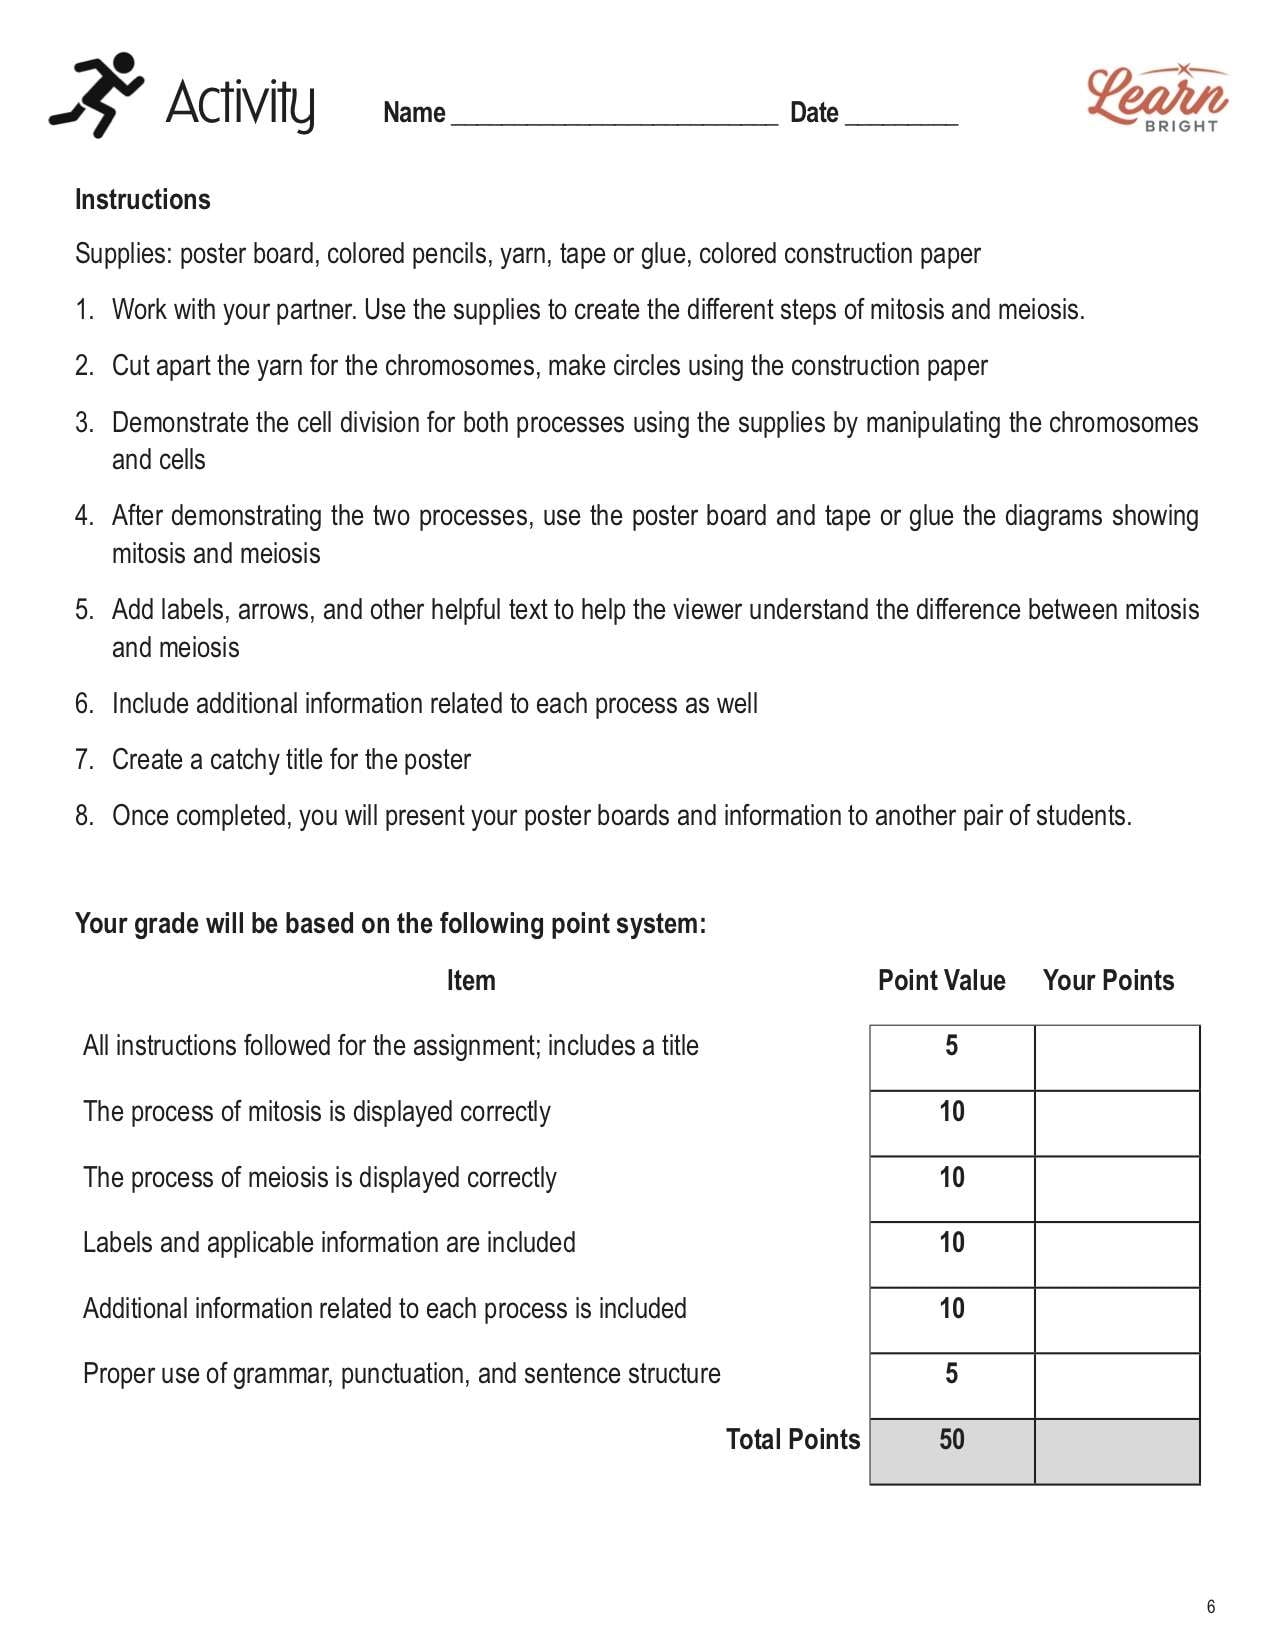 Meiosis Reading Comprehension Worksheets Answer Key